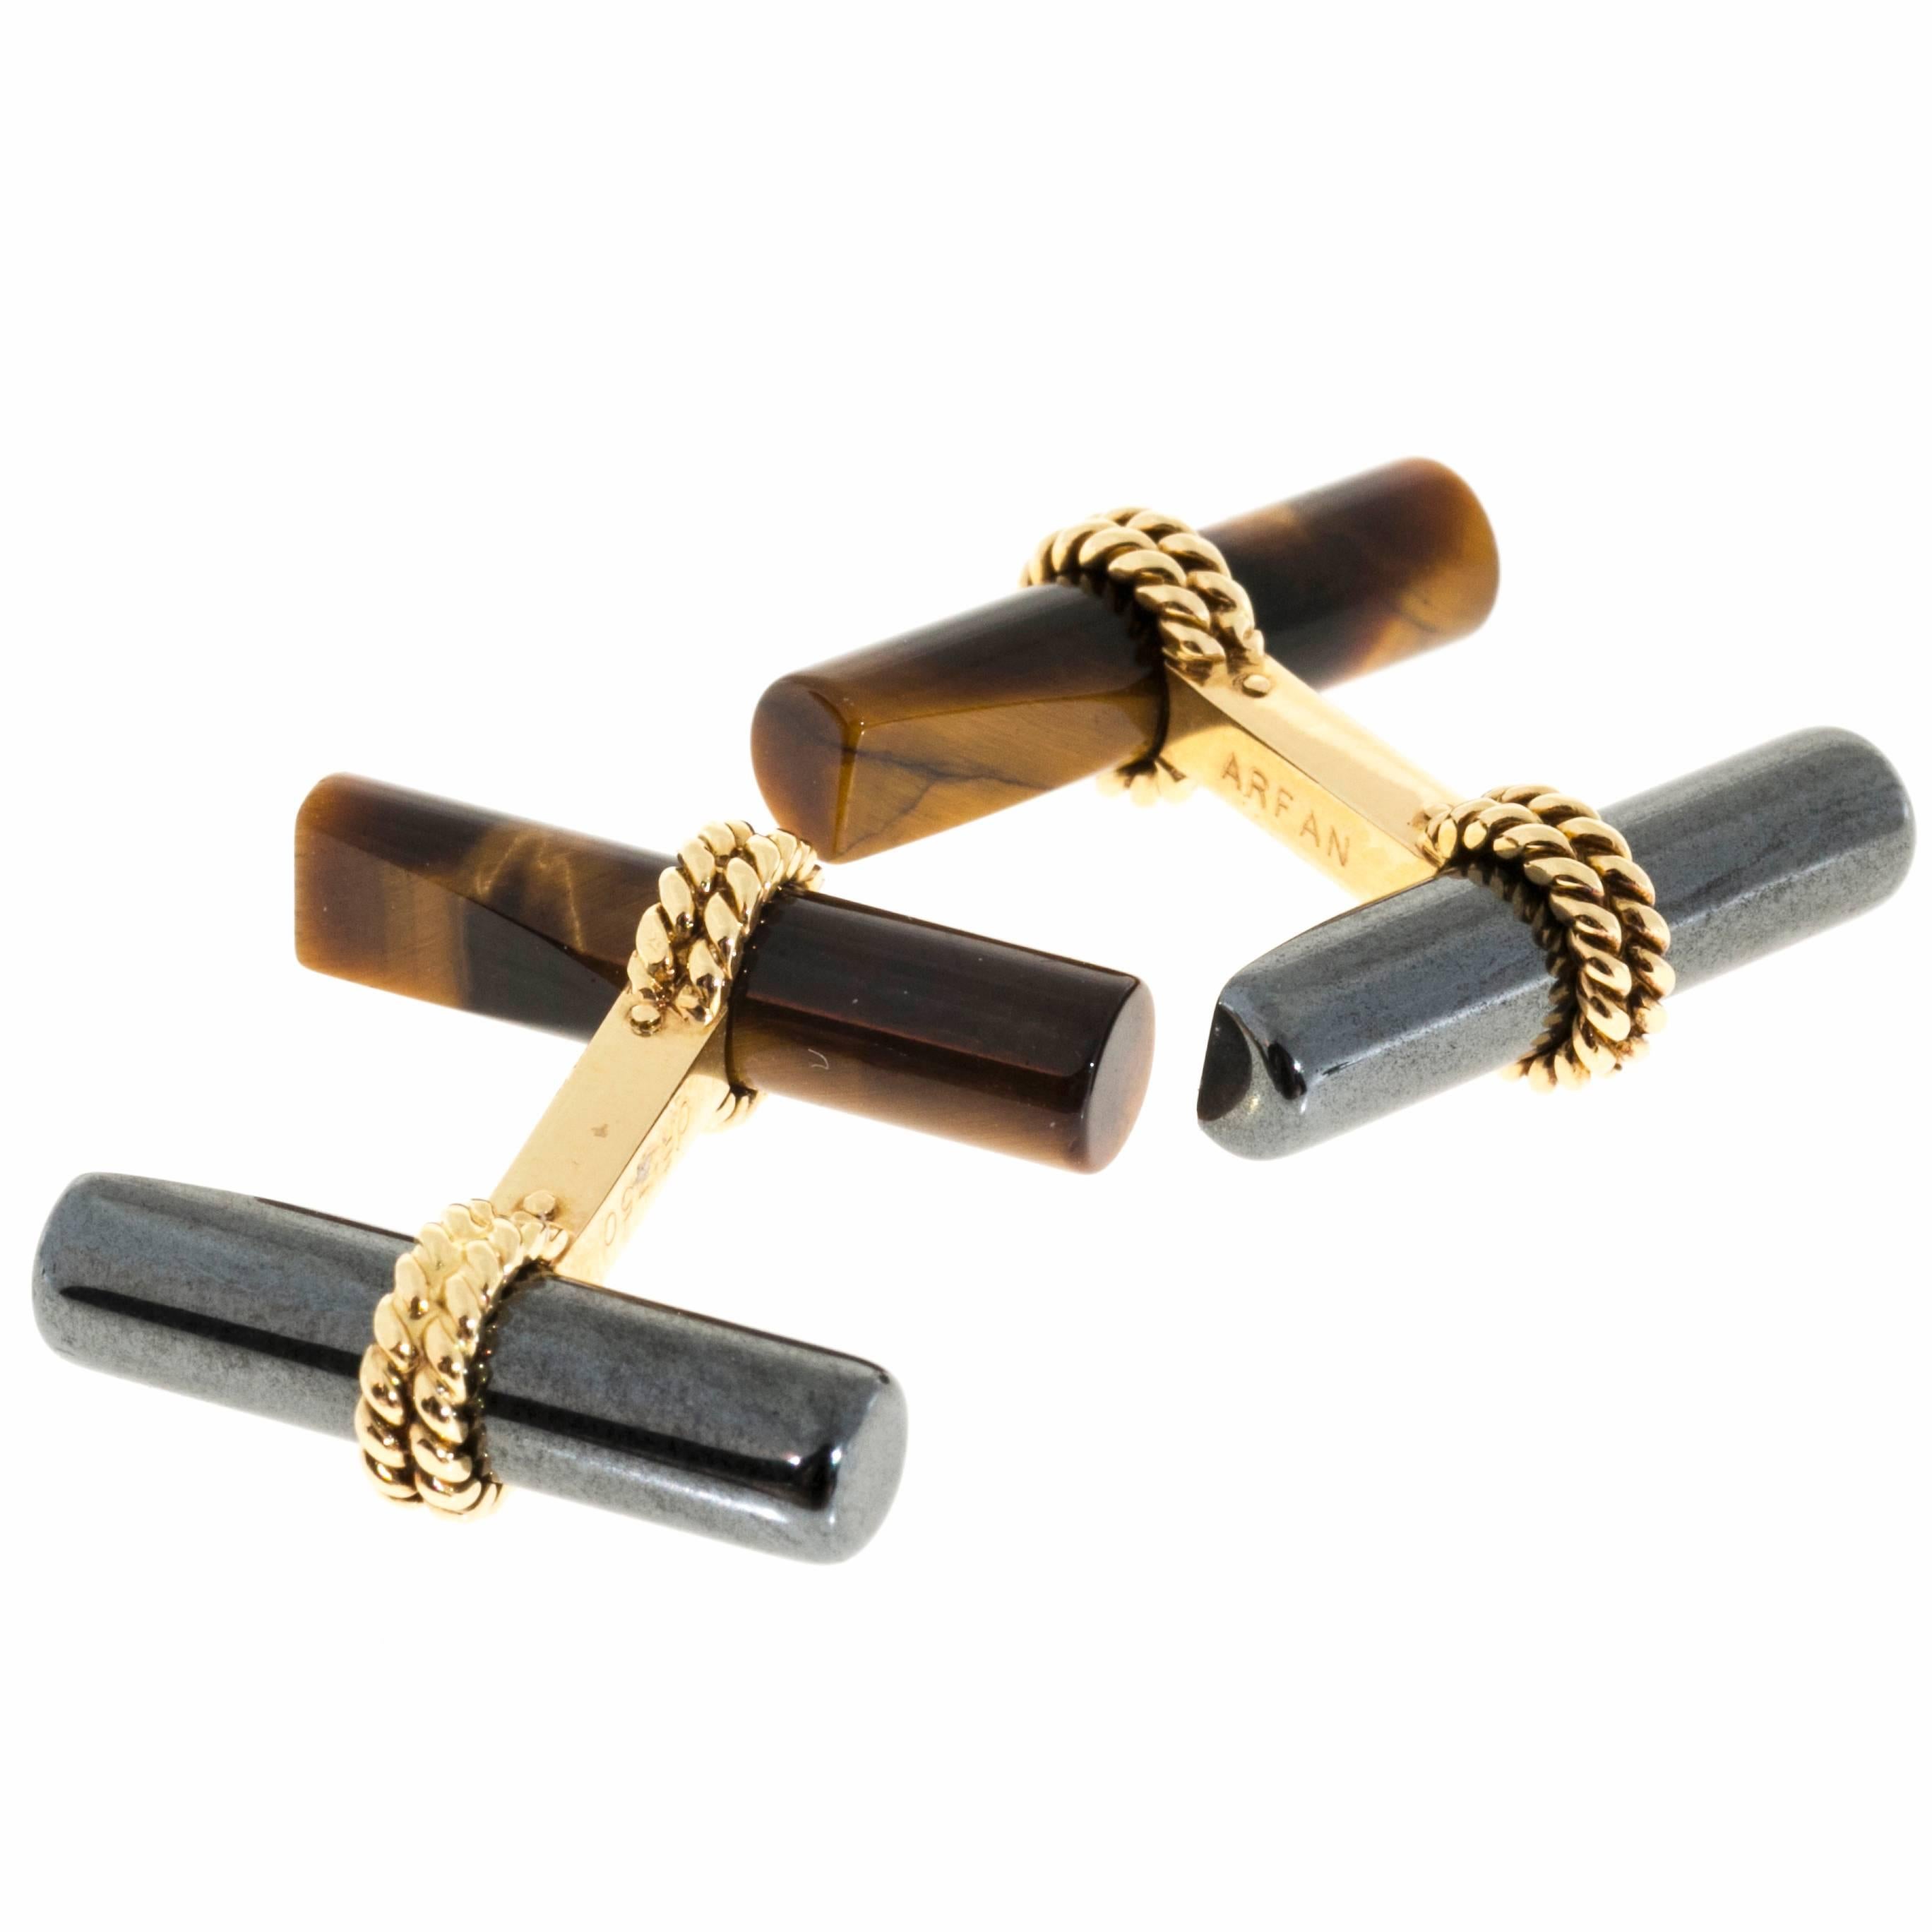 1960's 18k yellow gold cuff links with interchangeable ribbed gold and genuine gem stone tubes. Combinations of gold on both sides or gold on one side and Tiger Eye or Hematite on the other can be used. The tubes are removed by rotating and sliding